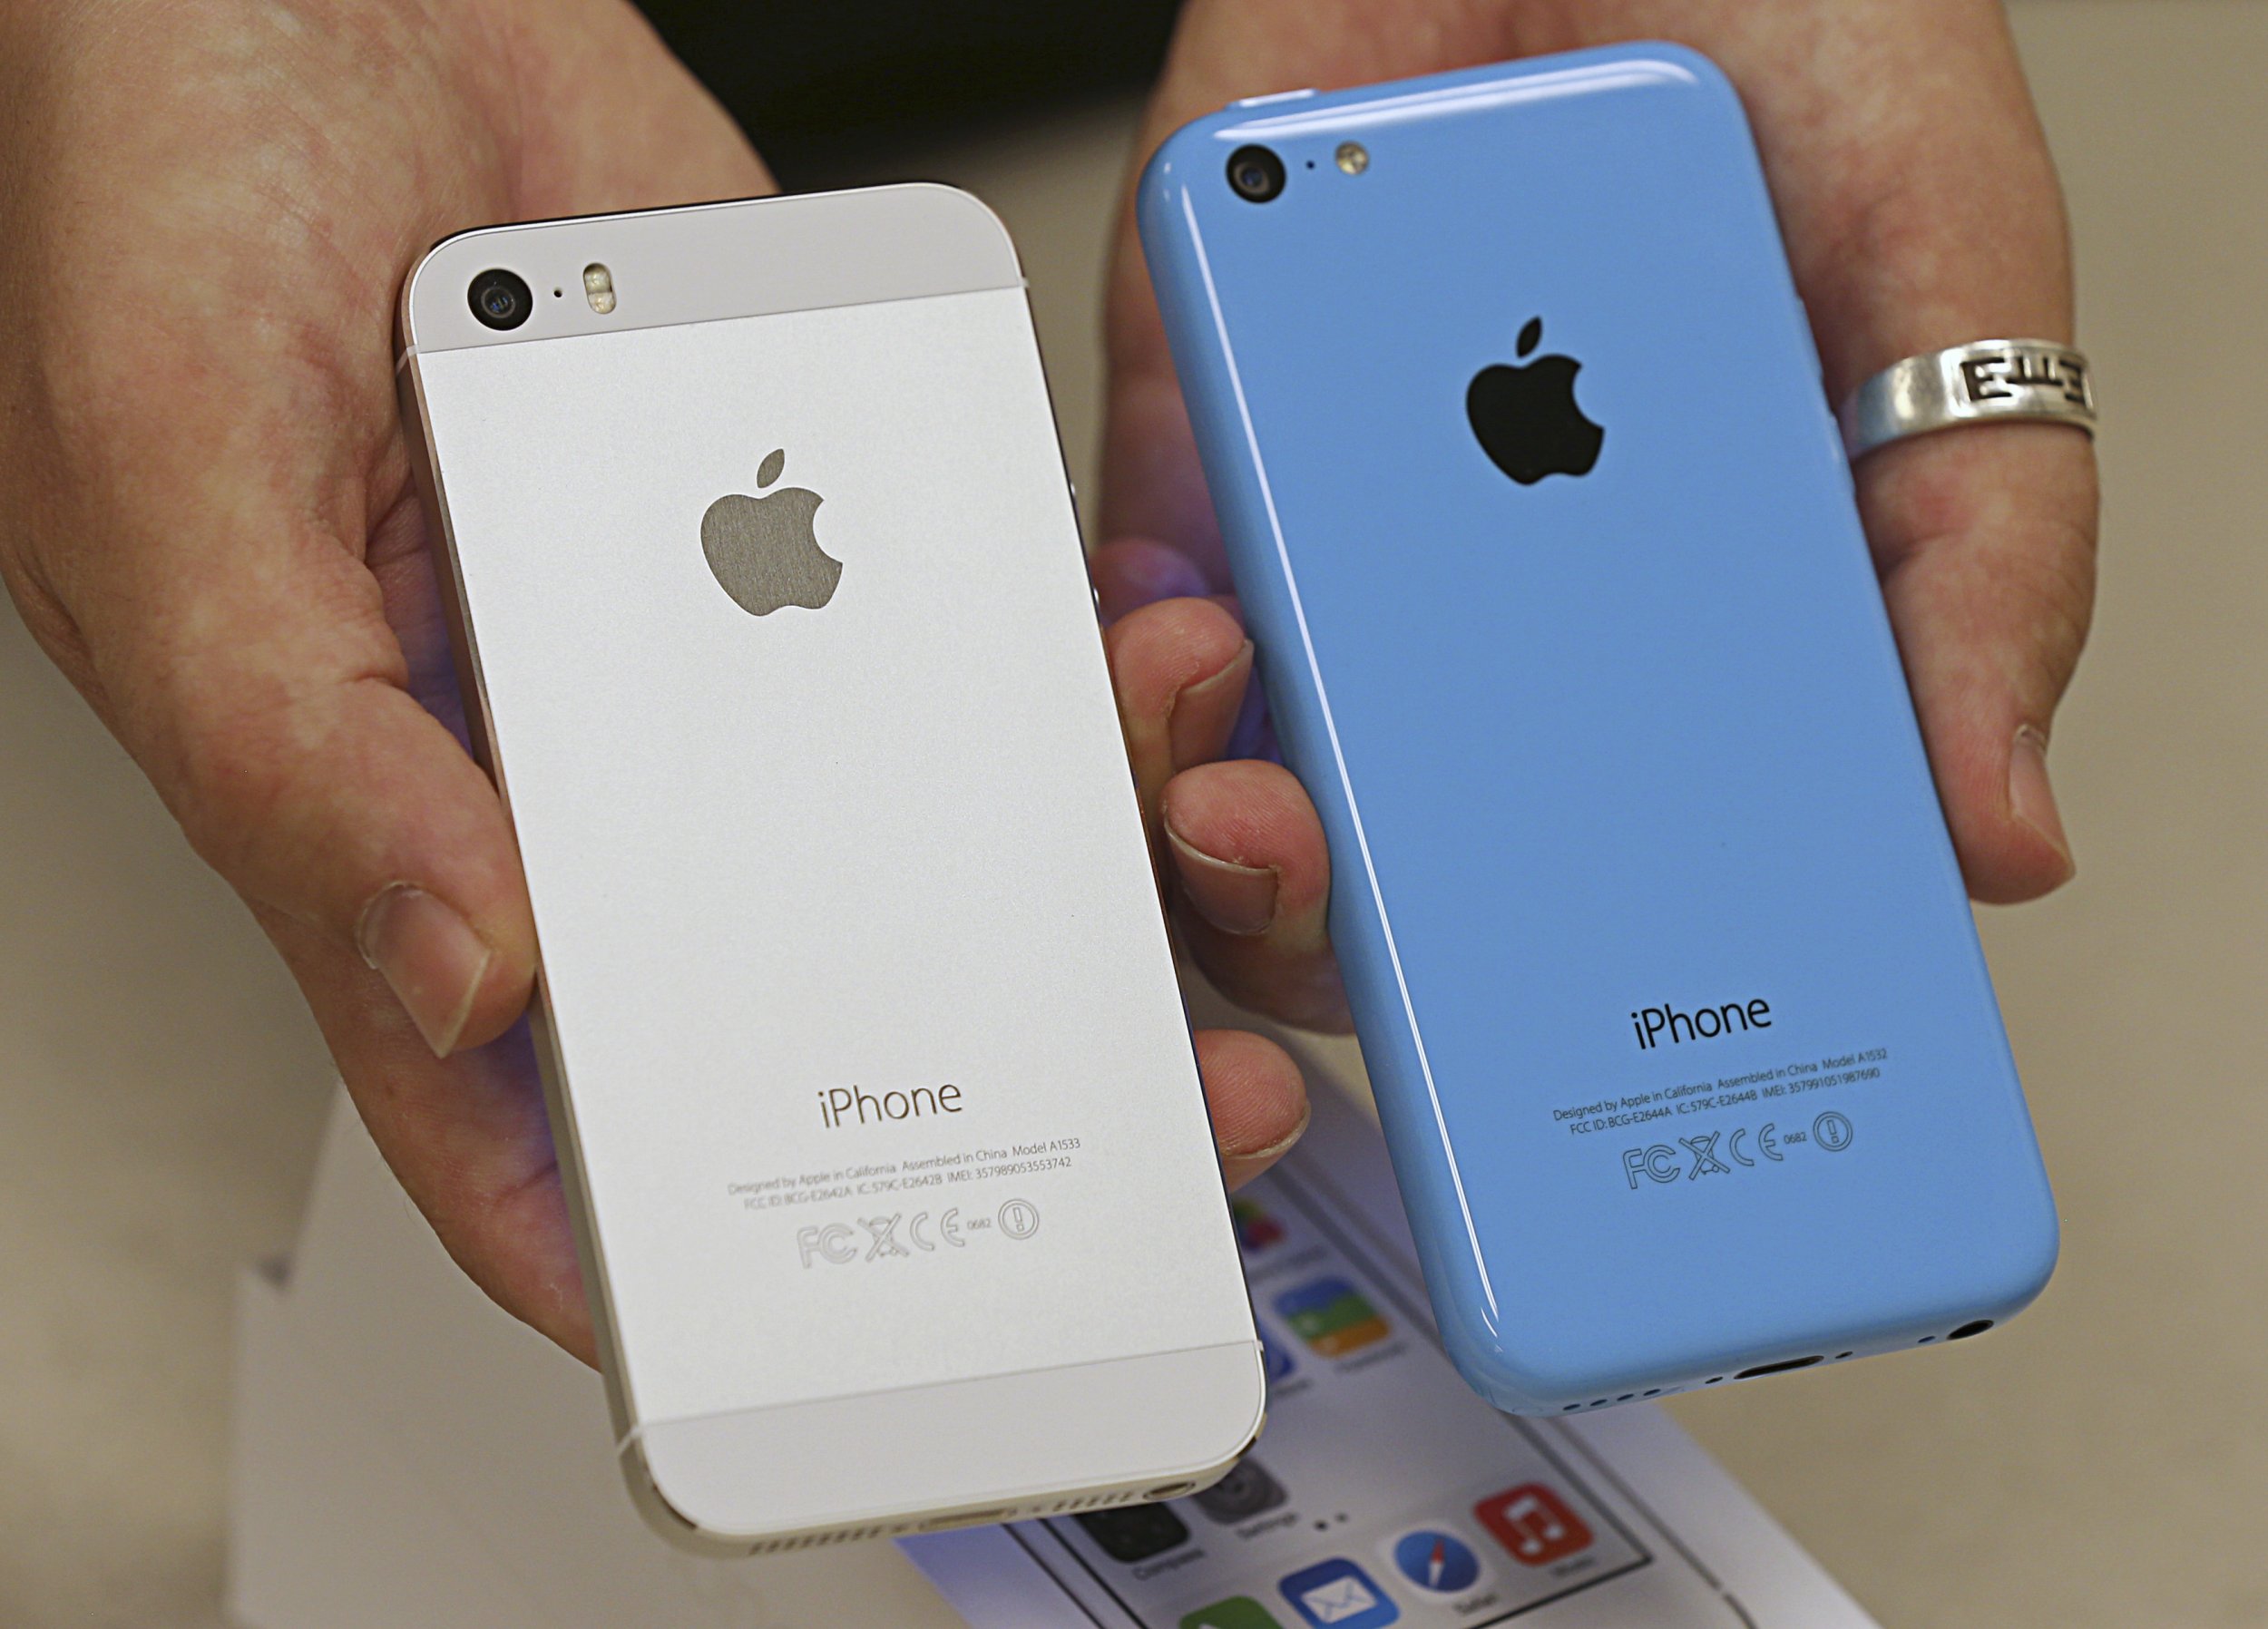 Apple Iphone 5s Release Date Arrives New Models Could Fuel 28 Jump In